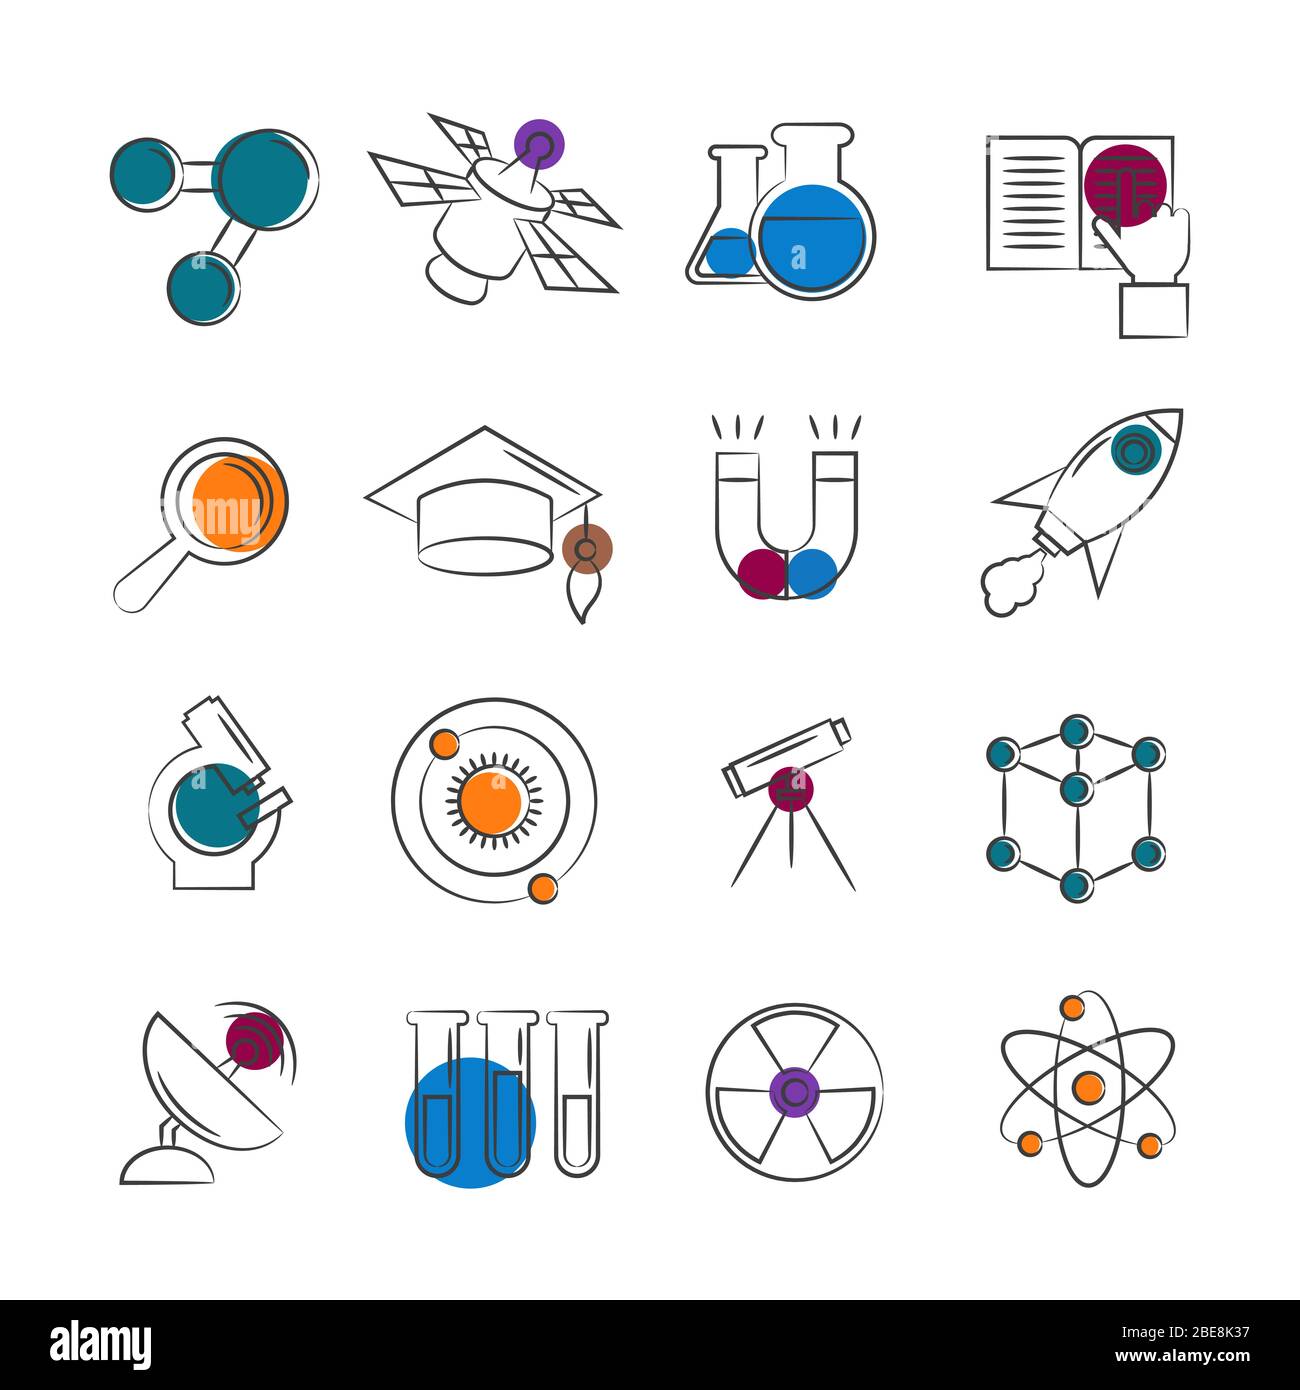 Science line icons collection with colorful details. Science flat elements. Vector illustration Stock Vector